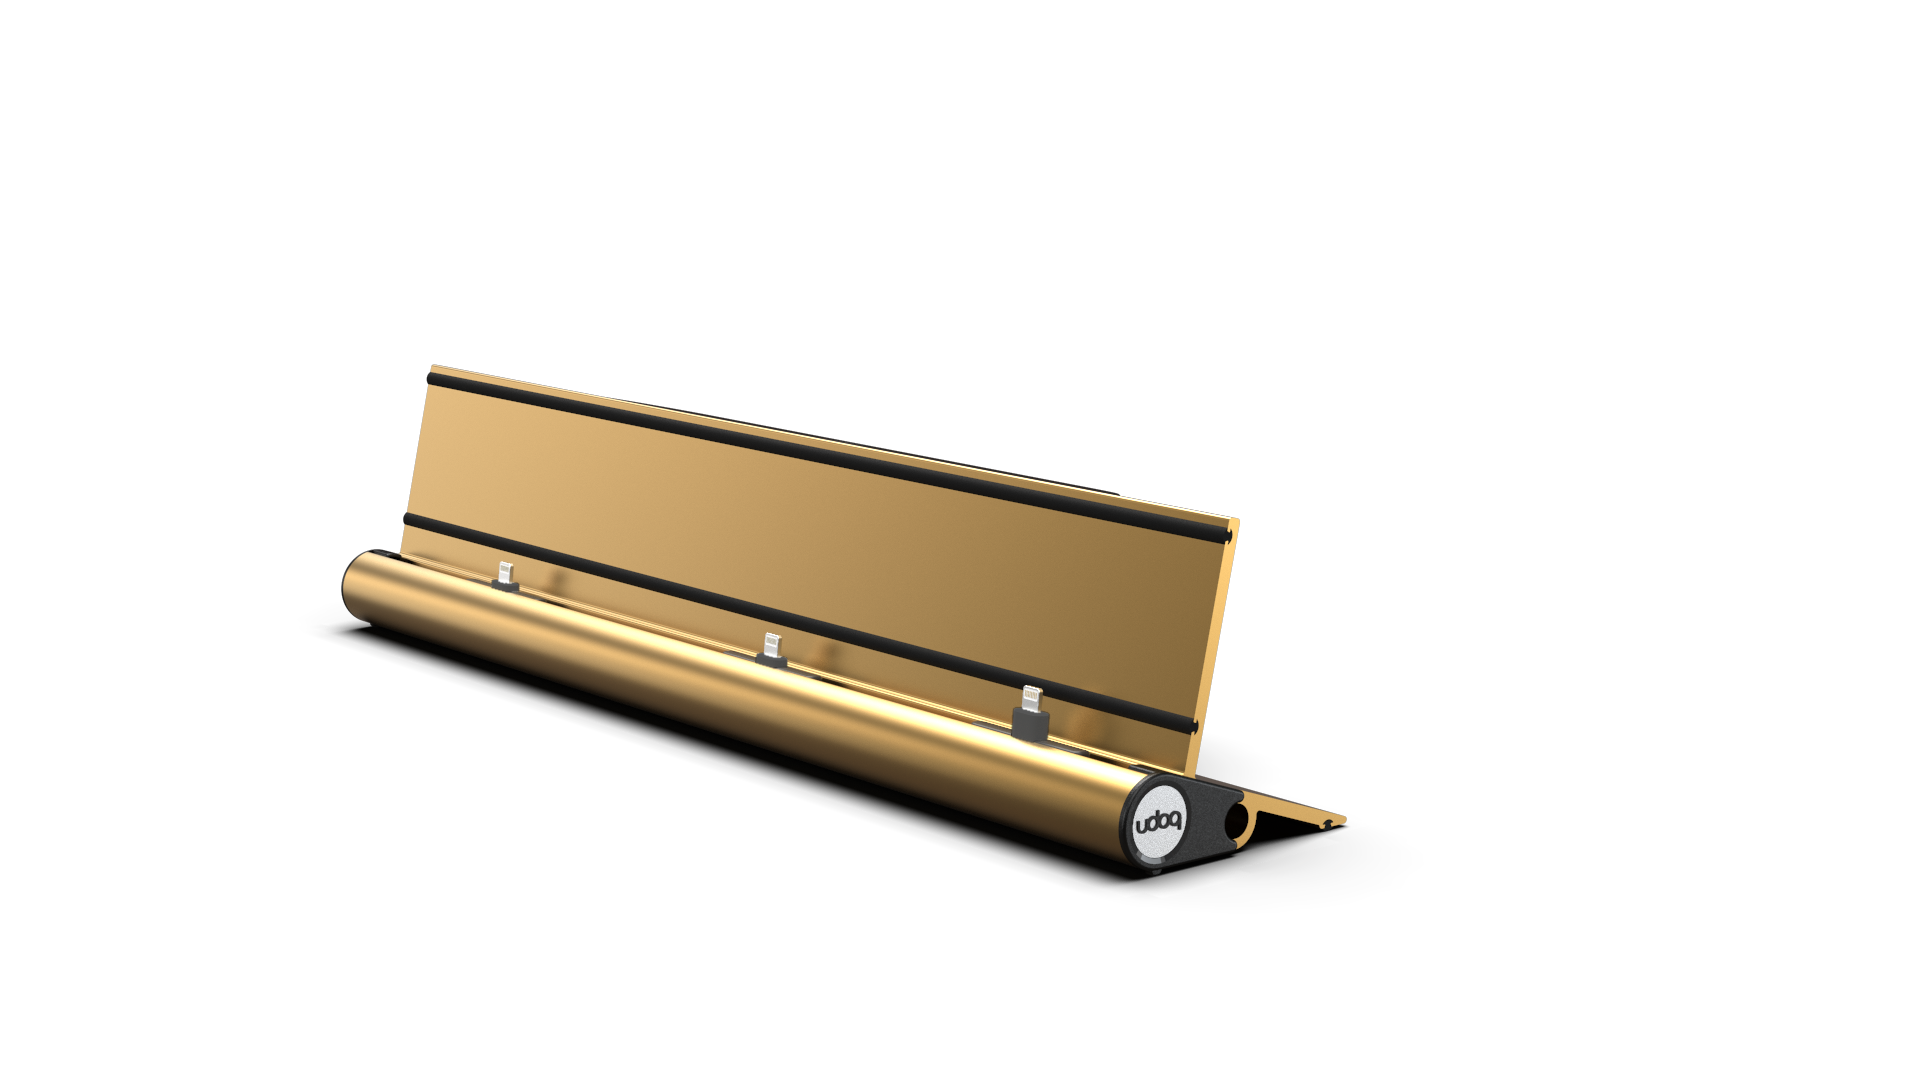 udoq Gold multi-charger with Apple Lightning connectors